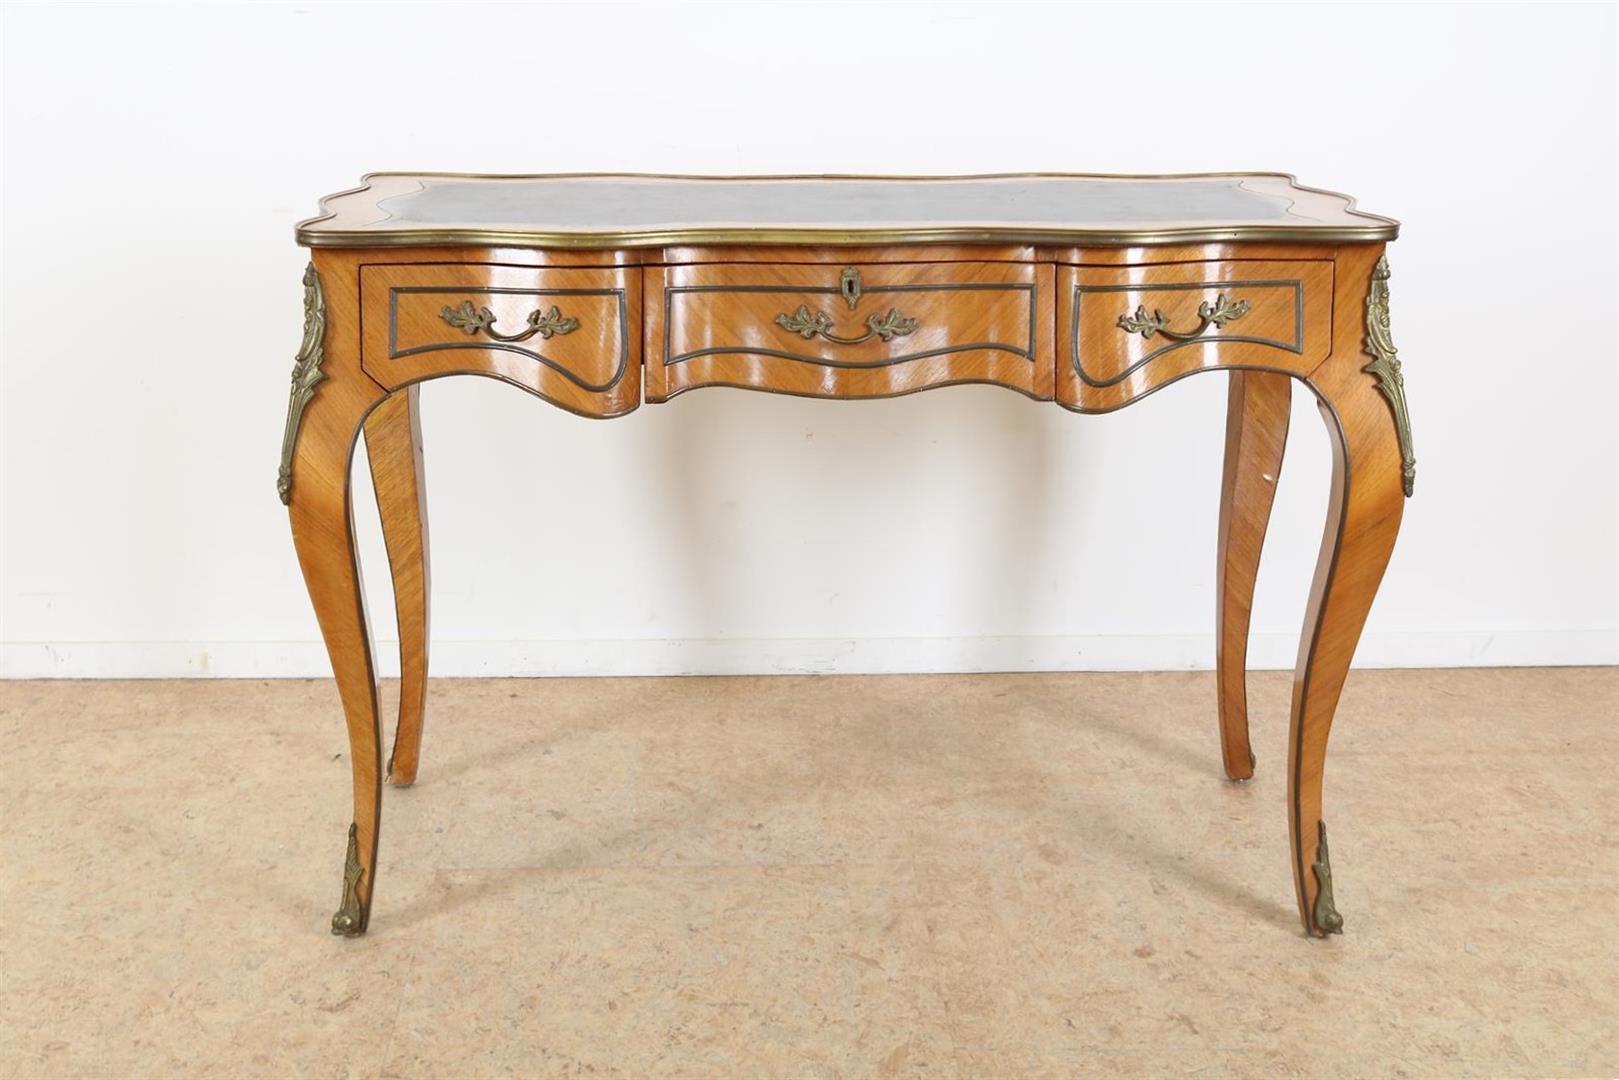 Napoleon III desk with convertible legs and bronze fittings, late 19th century, 83 x 122 x 62 cm.